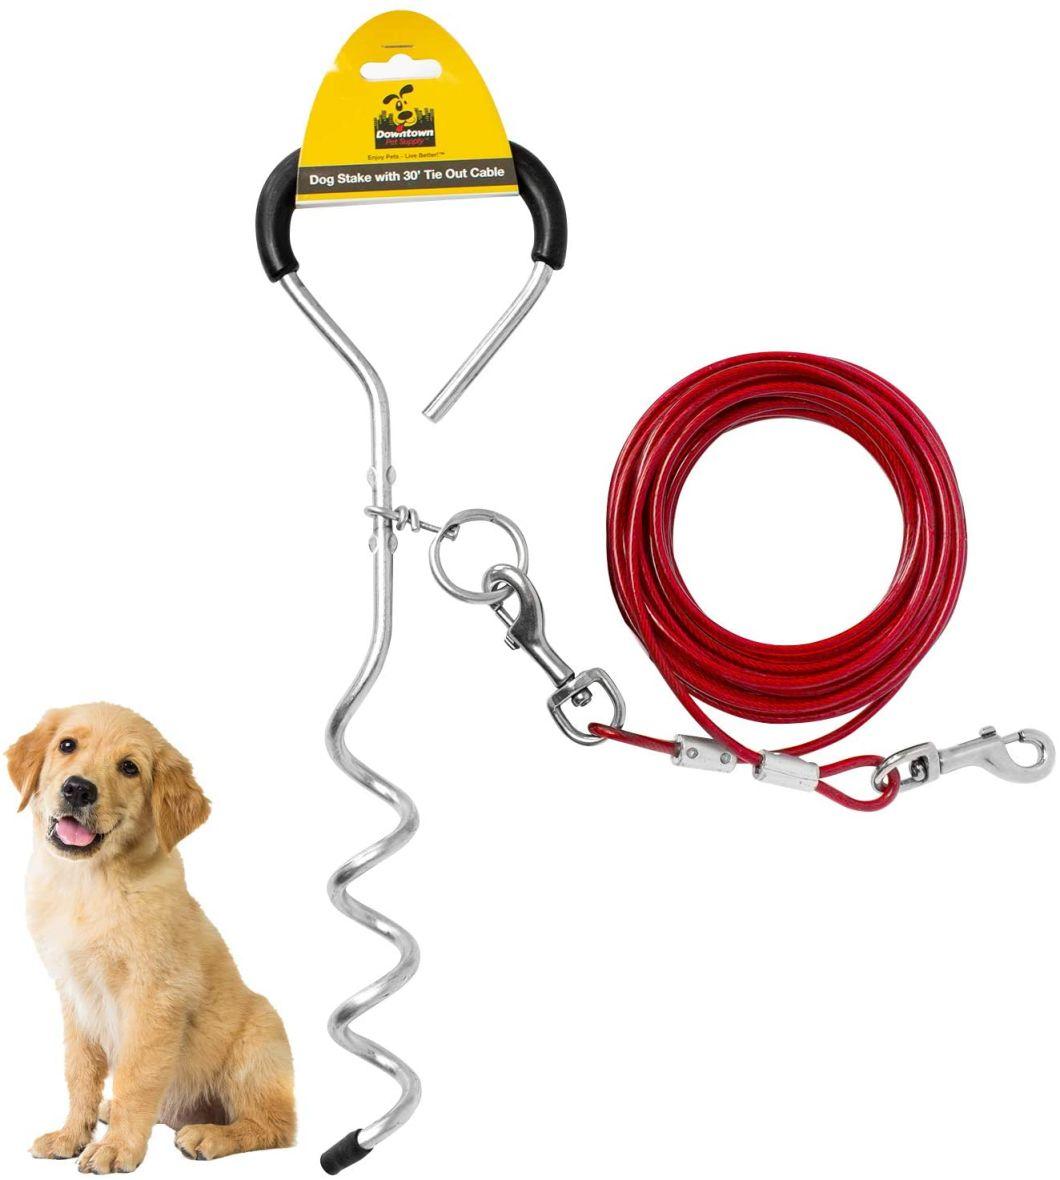 Dog Products, Updated Version Easily Visible Resist Rust Dog Leash Dog Tie-out Cable